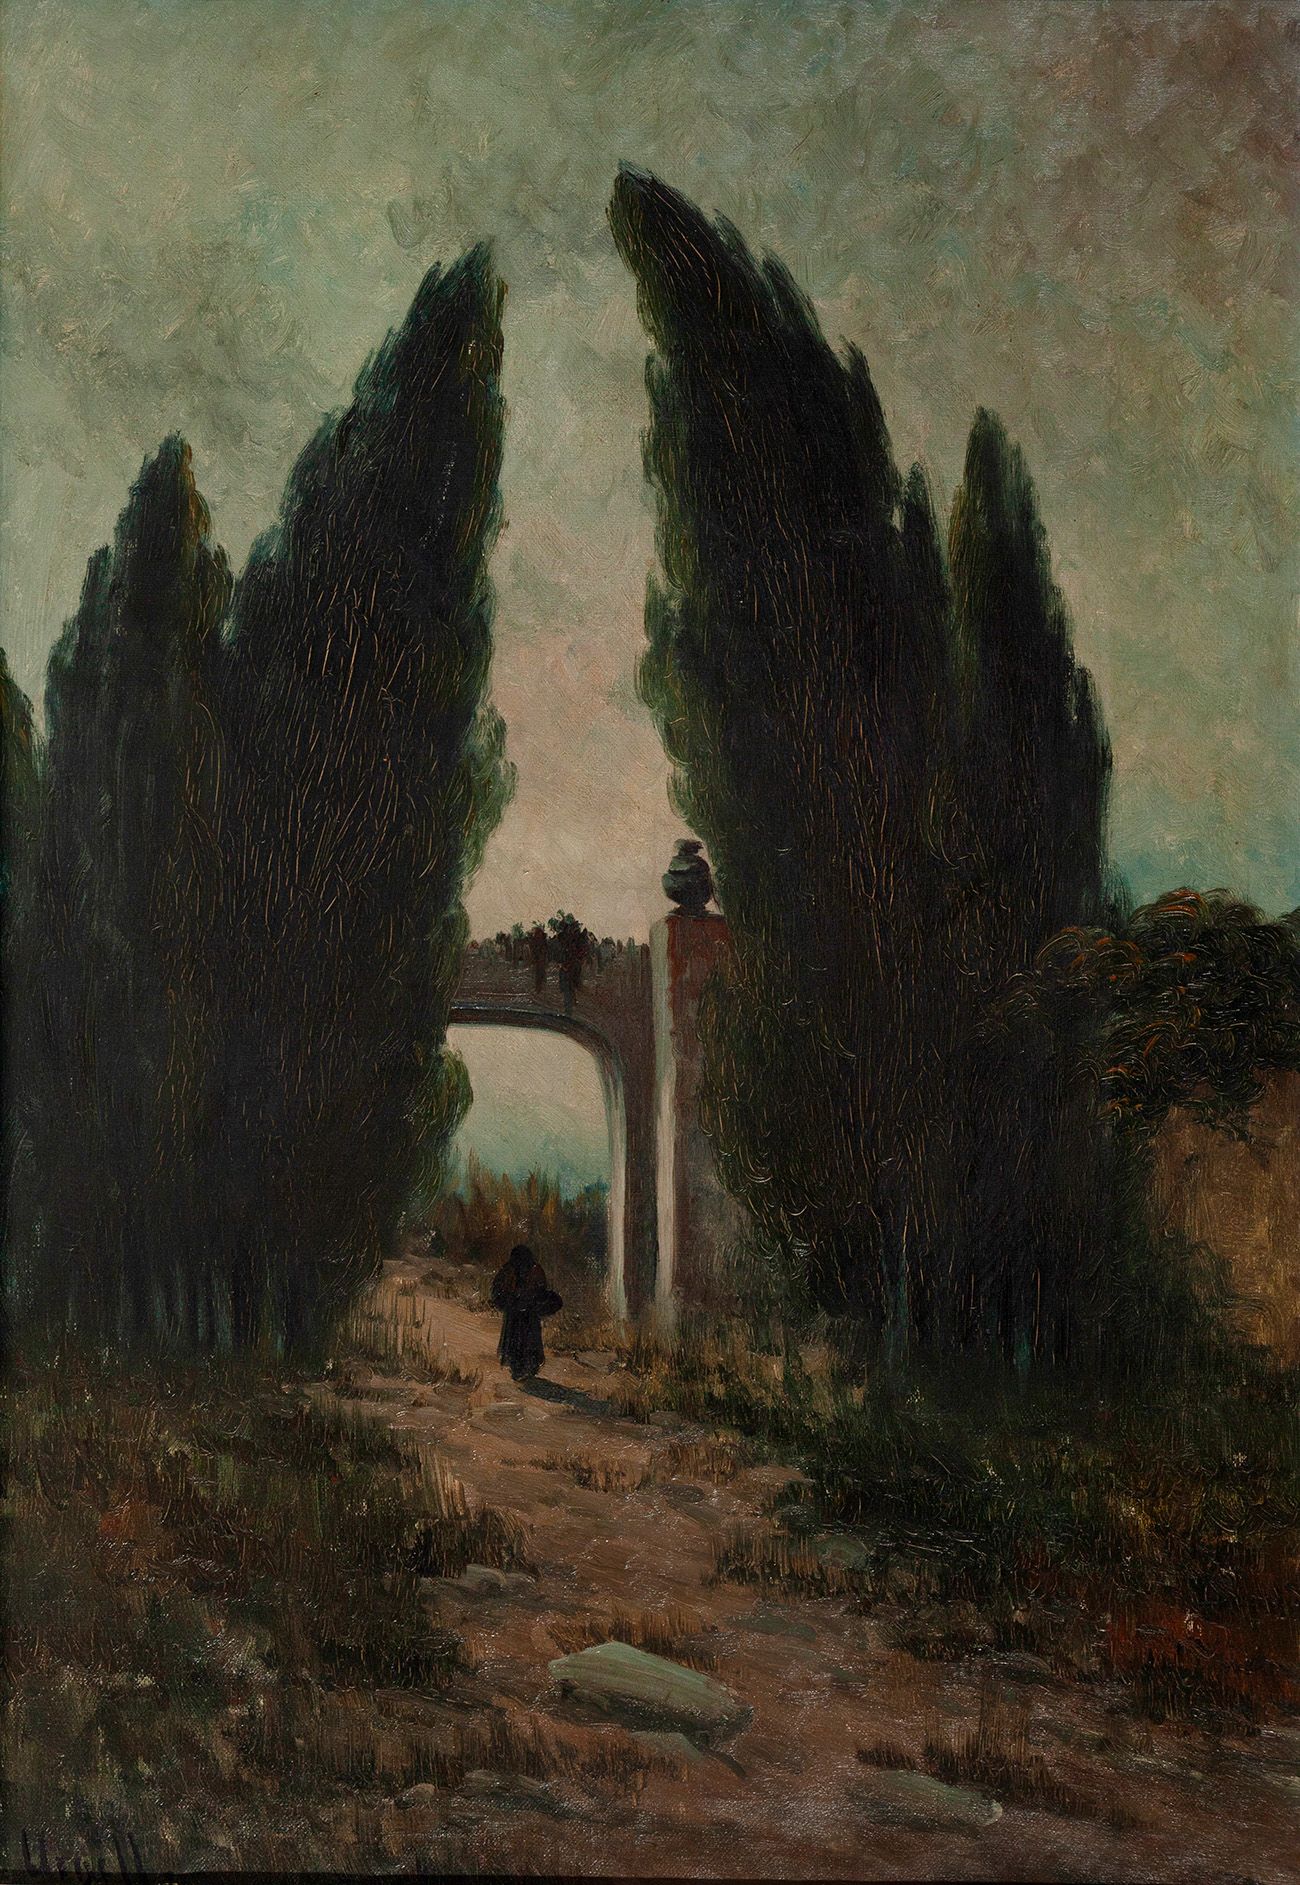 Null MODEST URGELL INGLADA (Barcelona, 1839 - 1919).
"Landscape with figure and &hellip;